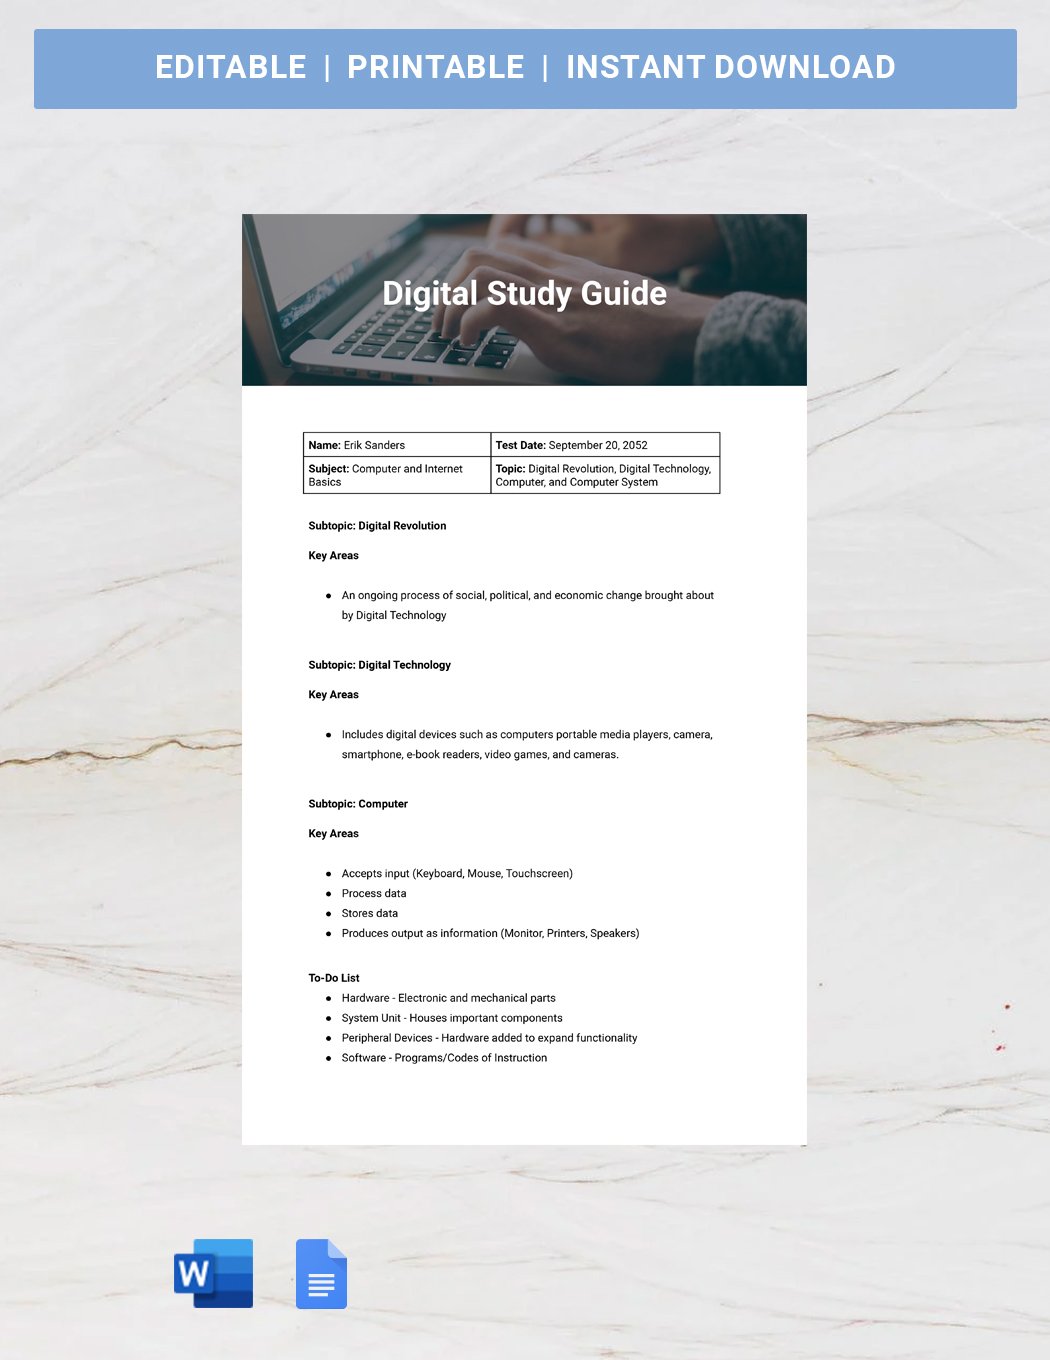 Free Digital Study Guide Template in Word, Google Docs, Apple Pages